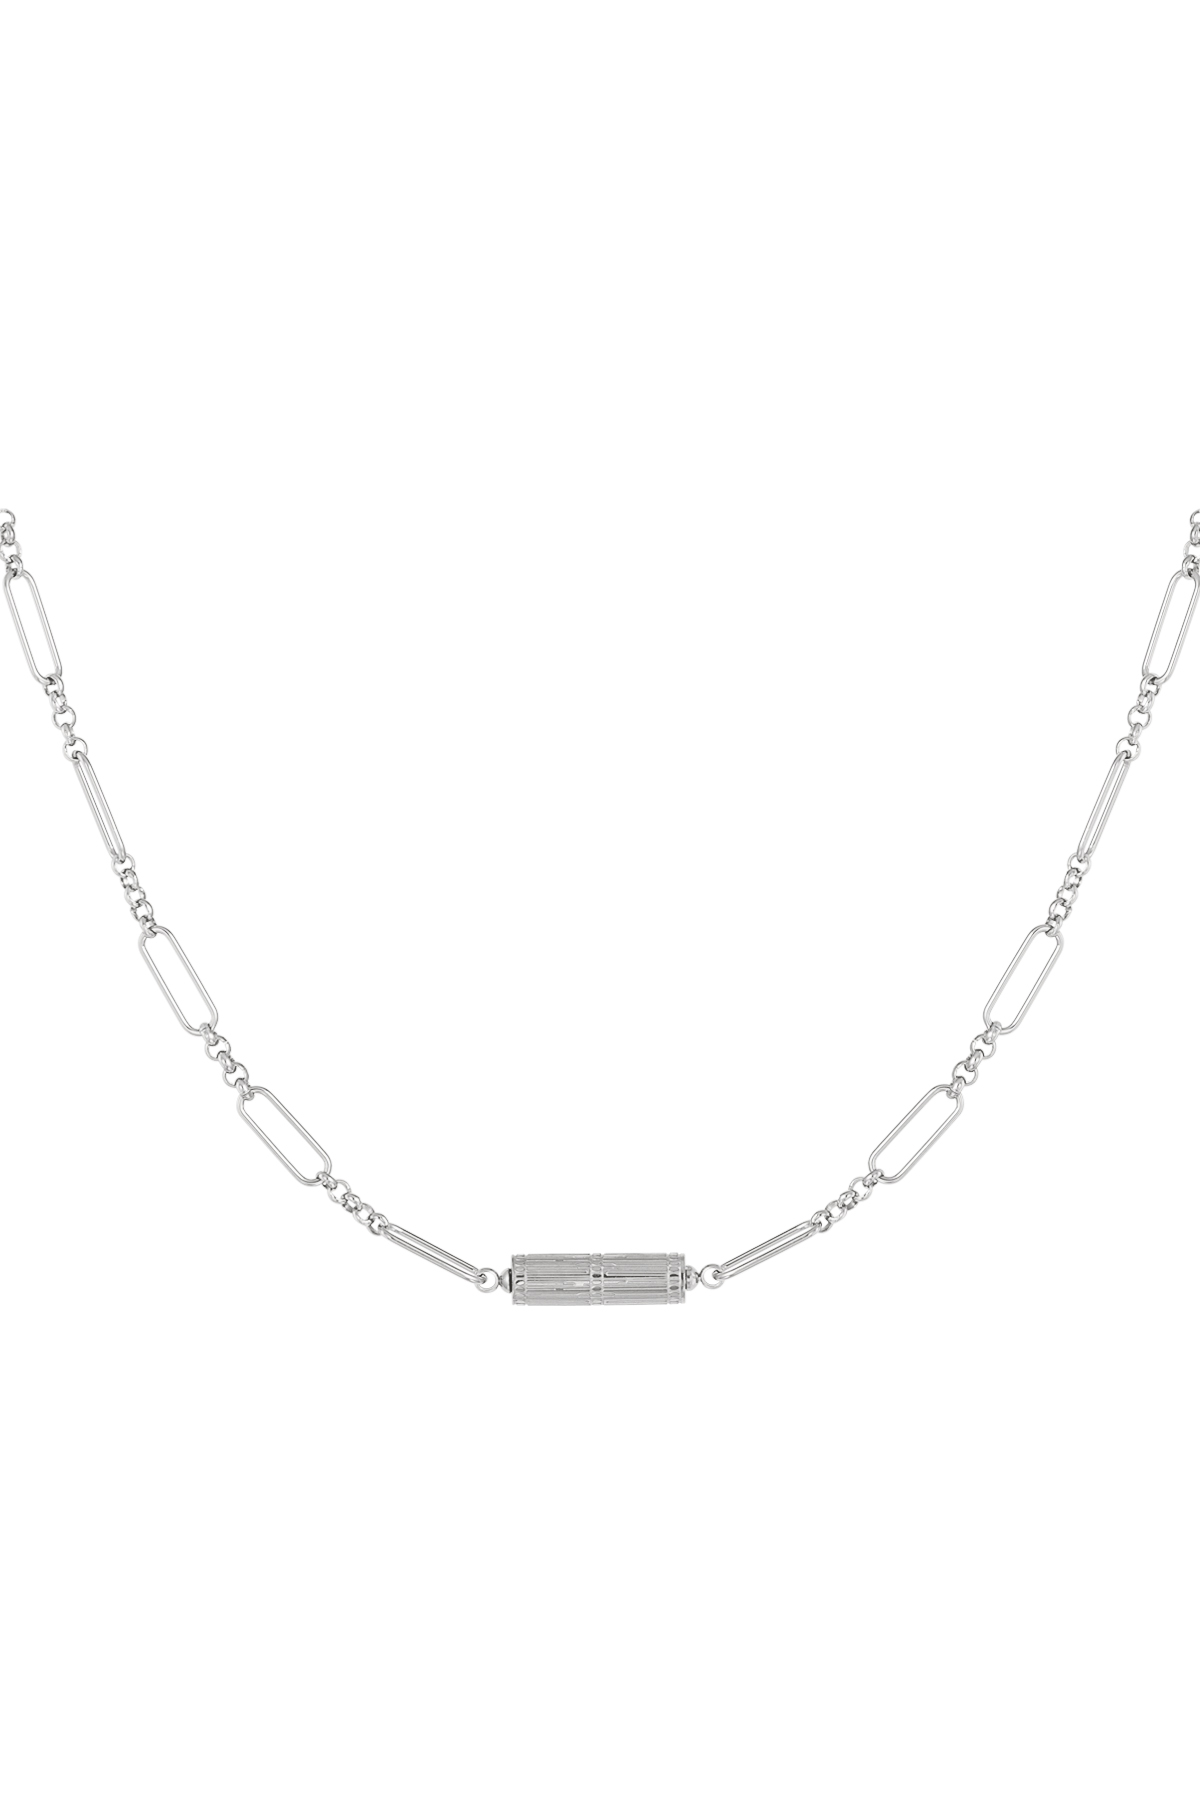 Link chain with charm - silver Stainless Steel